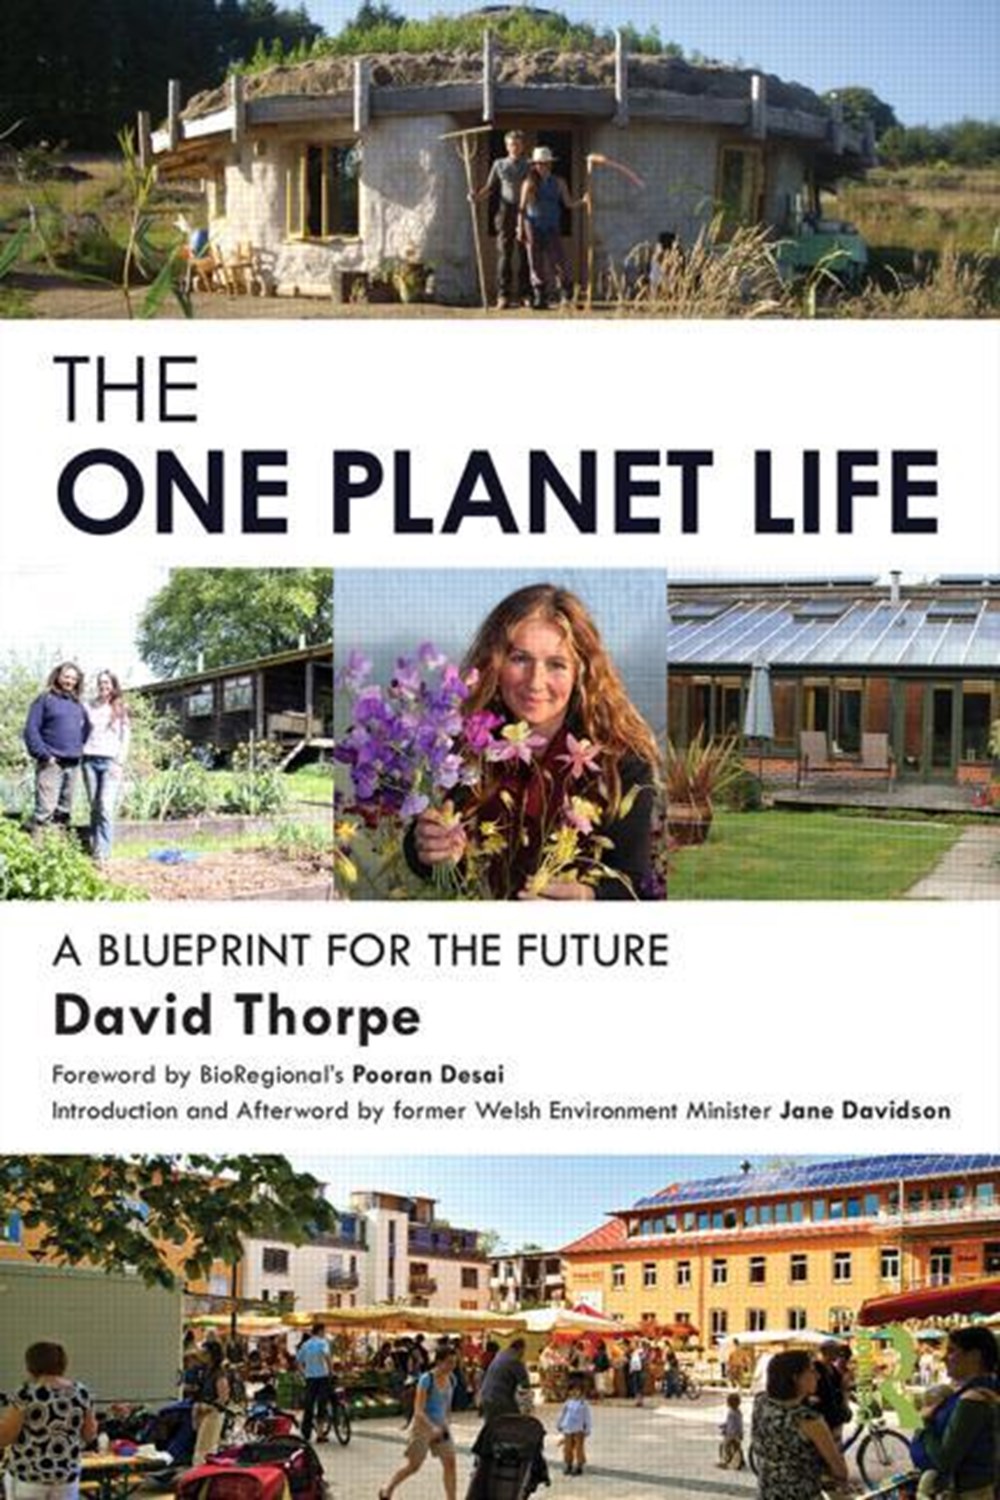 'One Planet' Life: A Blueprint for Low Impact Development